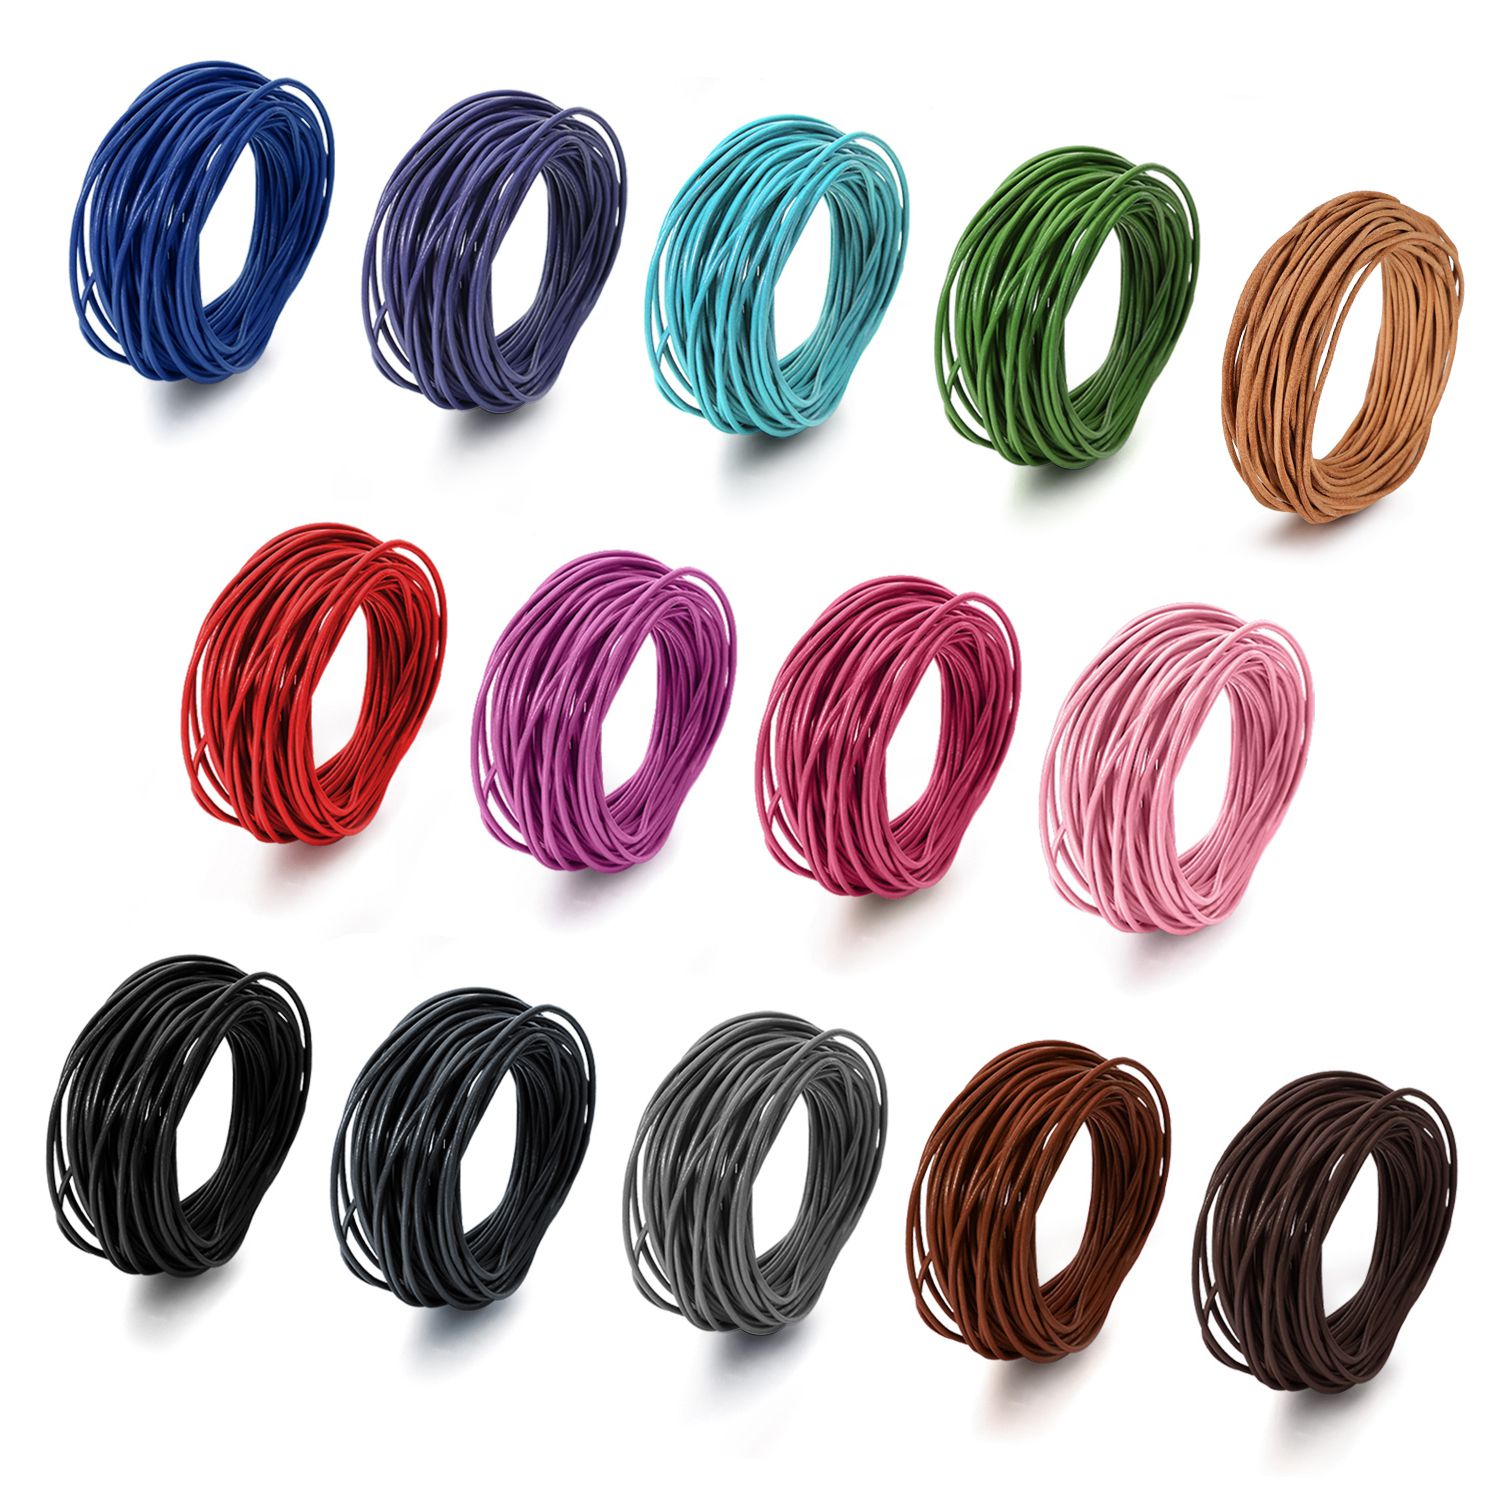  BEADNOVA 1mm Elastic Stretch Crystal String Cord for Jewelry  Making Bracelet Beading Thread (12m/ Roll, Total 10 Rolls Mixed Color) :  Arts, Crafts & Sewing